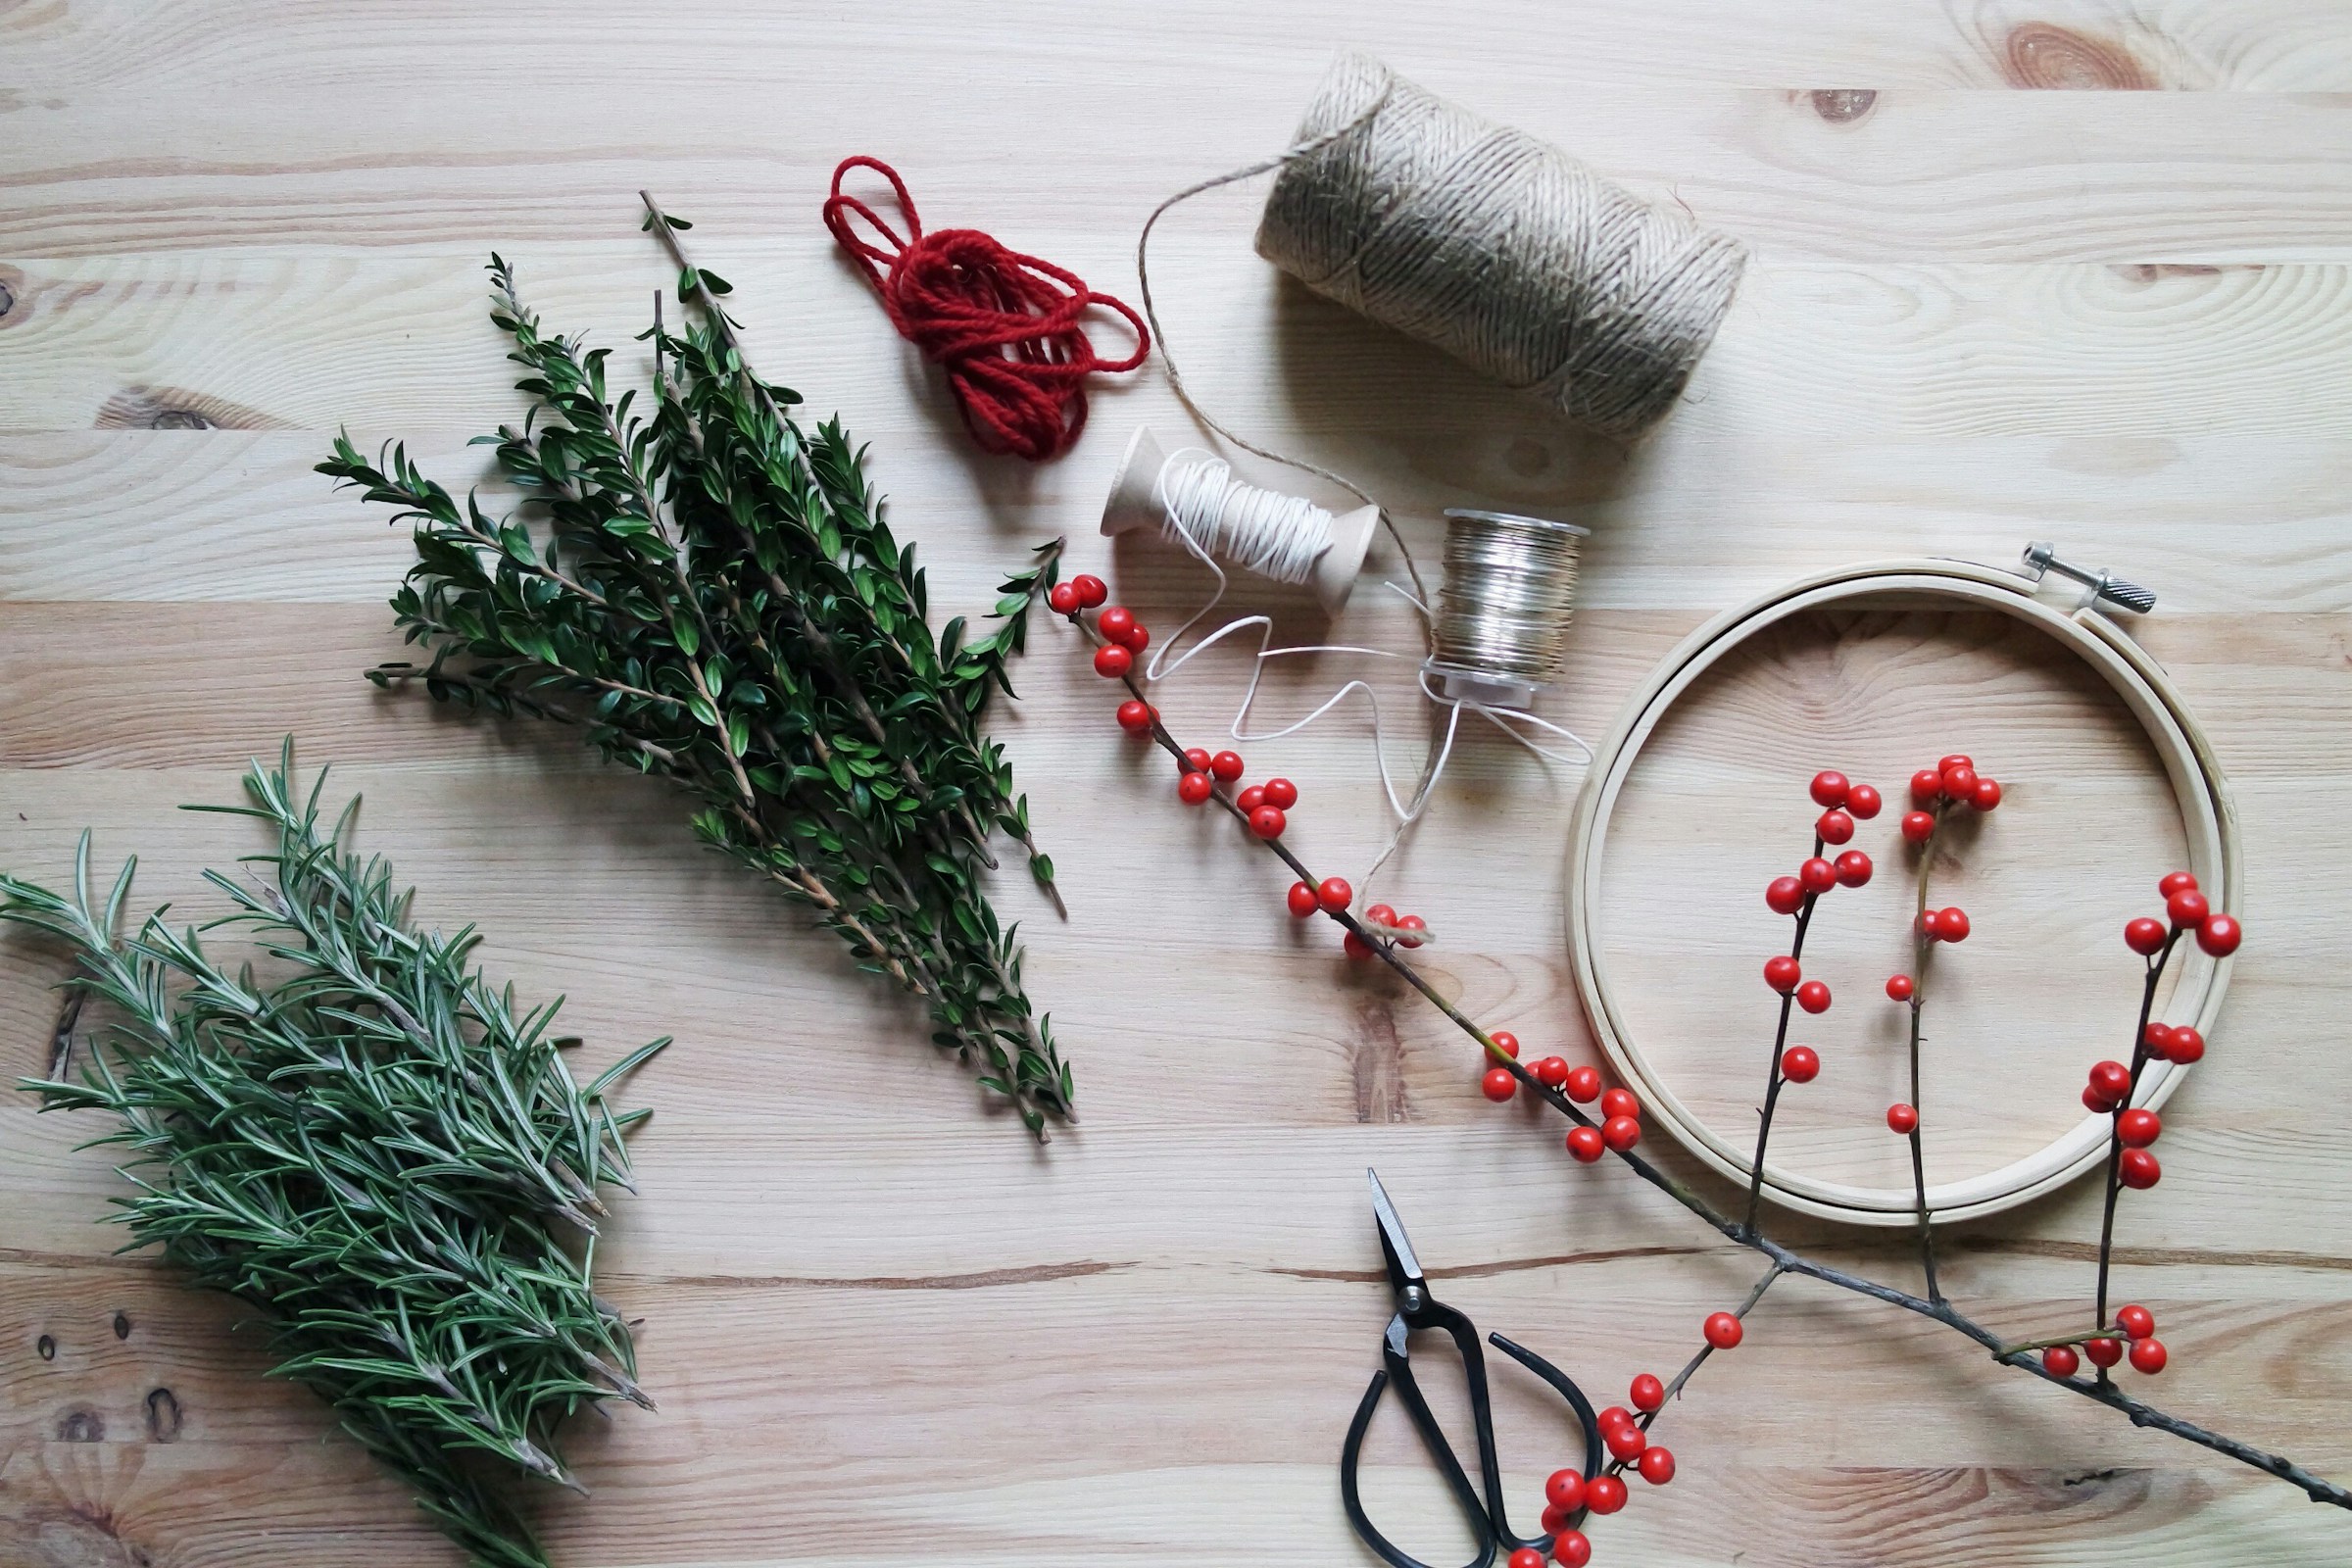 Herbs, string, scissors, and more on a table | Source: Unsplash